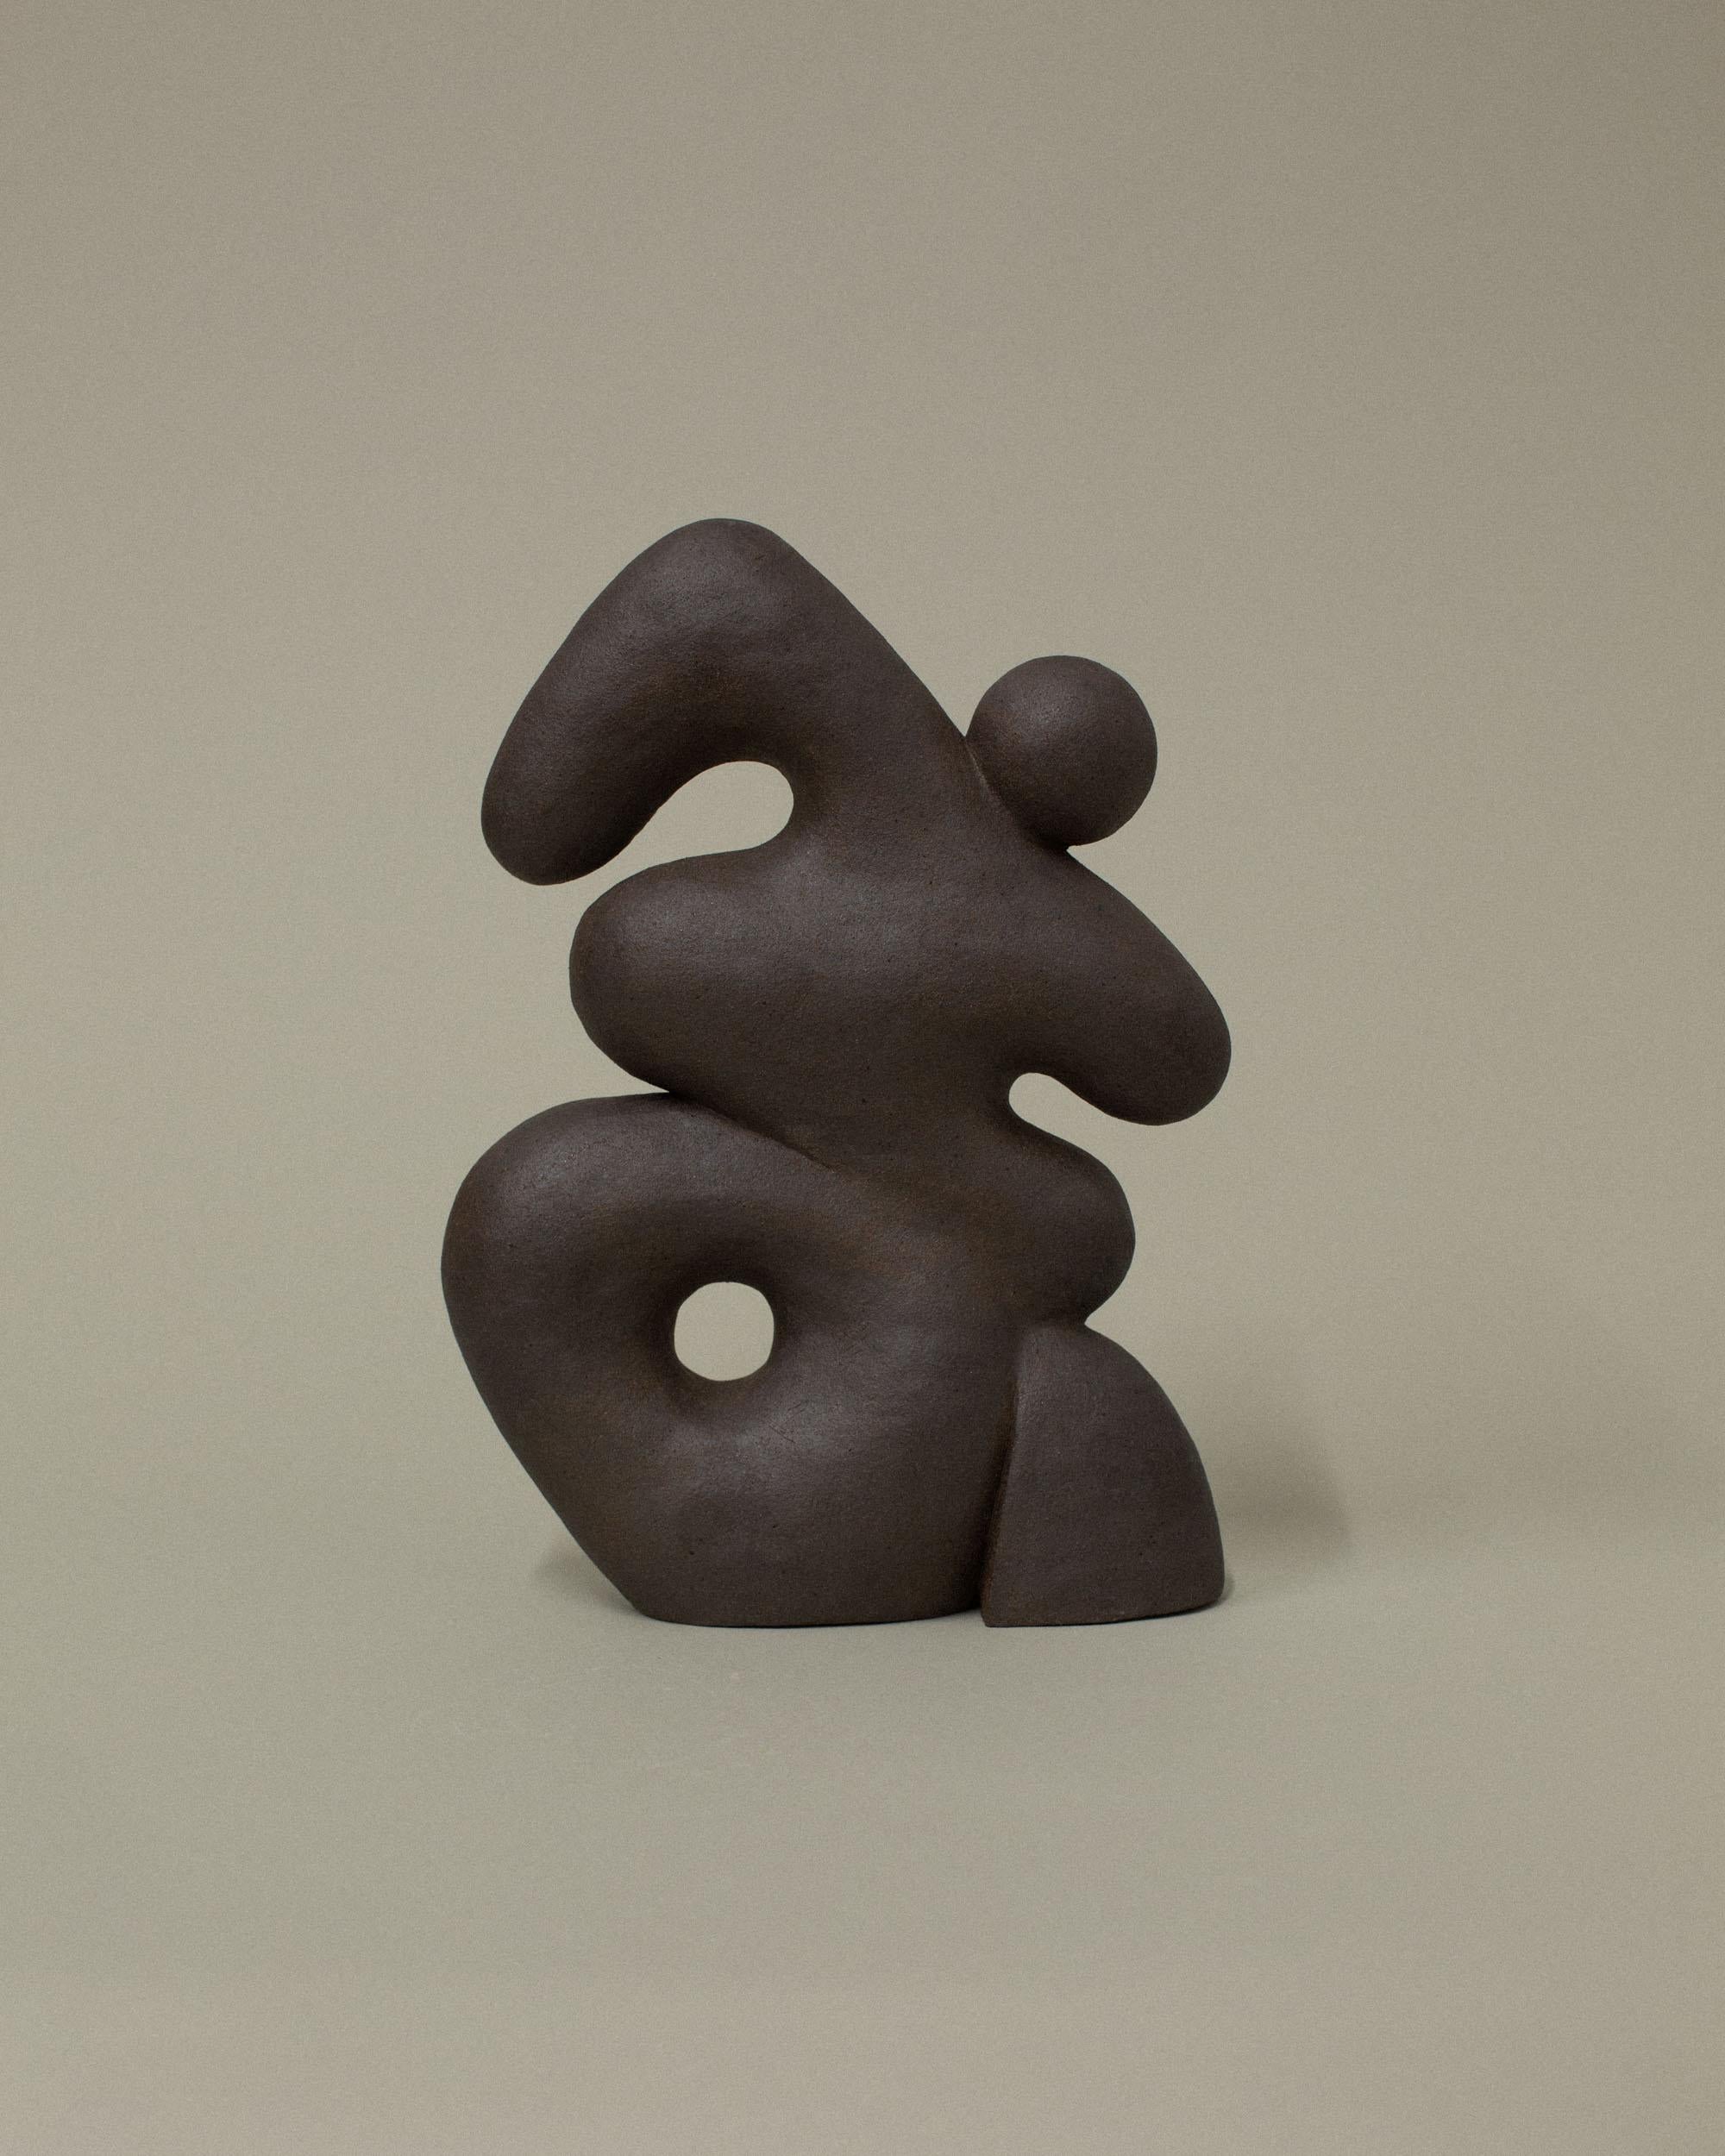 Post-Modern Dark Brown Hermes Sculpture by Common Body For Sale